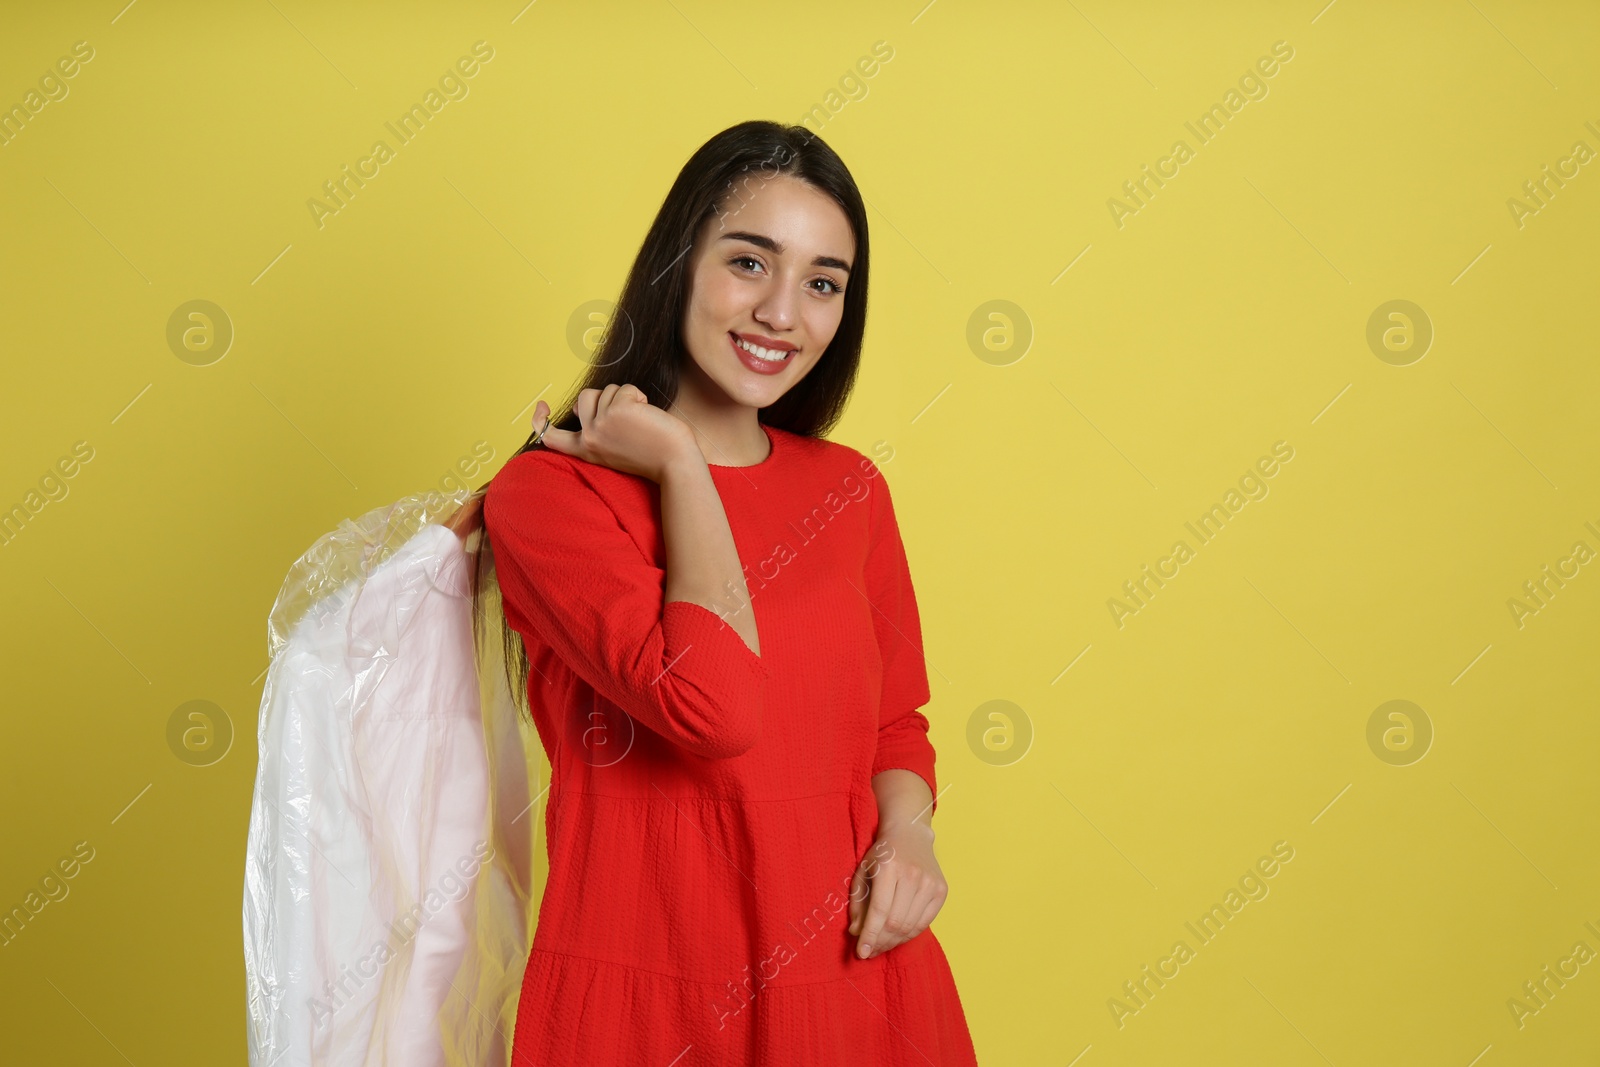 Photo of Young woman holding hanger with shirt in plastic bag on yellow background. Dry-cleaning service